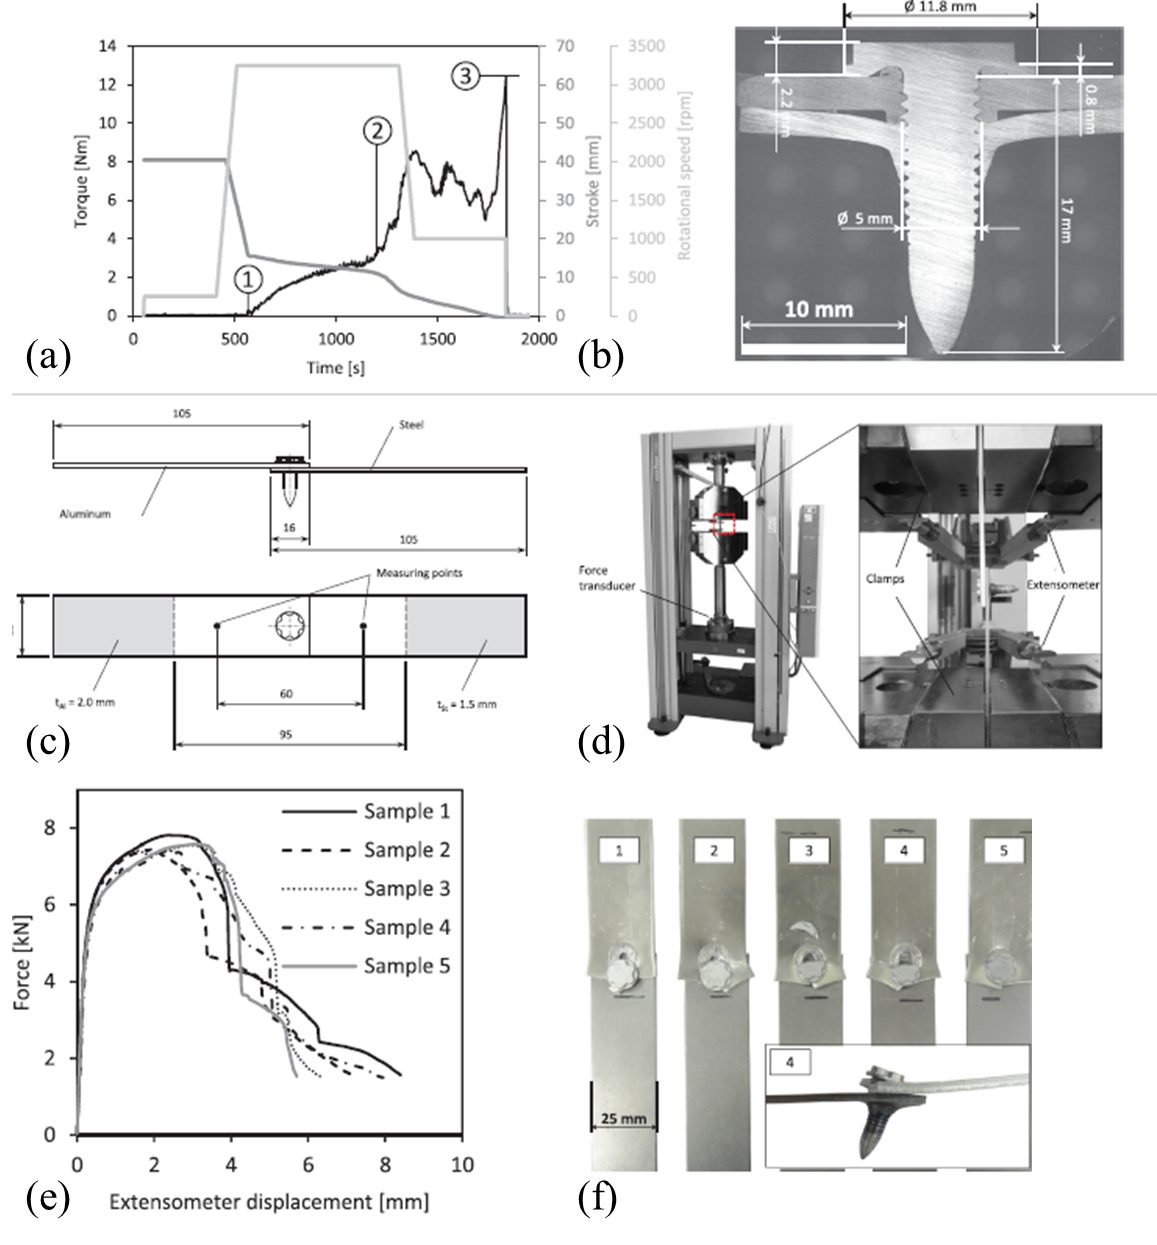 Figure 3: Joining parameters and cross section of single-lap shear specimen. (a) Relevant screwing parameters over time (representative example): start of warming up and penetration of the substrate material, beginning of thread forming, tightening torque. (b) Cross-section of connection with nominal dimensions. Static single-lap shear test of an aluminum-steel flow drill connection. (c) Geometry of specimen. (d) Experimental setup. (e) Force-displacement curves. (f) Fracture appearance.G-15